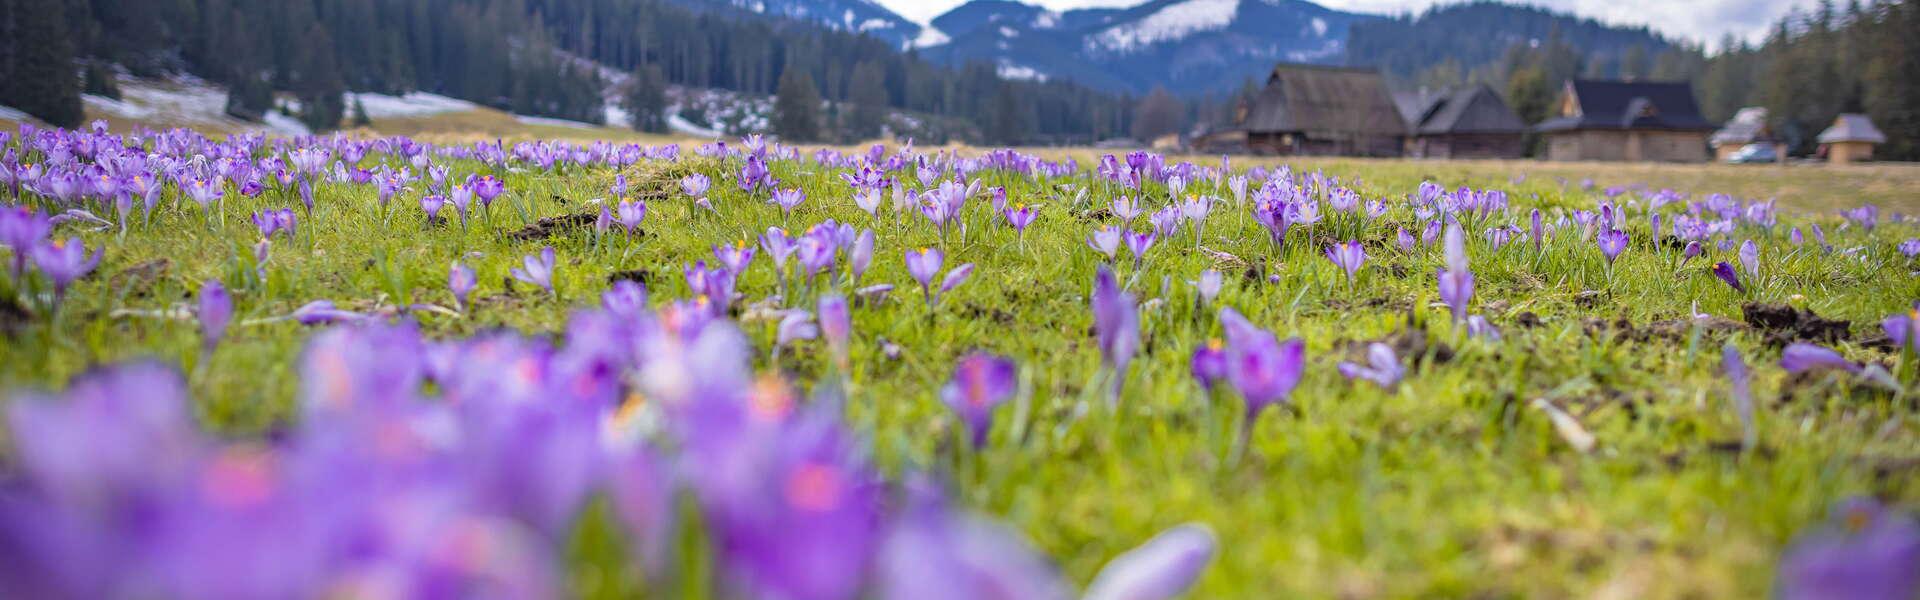 A meadow with flowers called crocuses. Wooden huts and mountains in the background